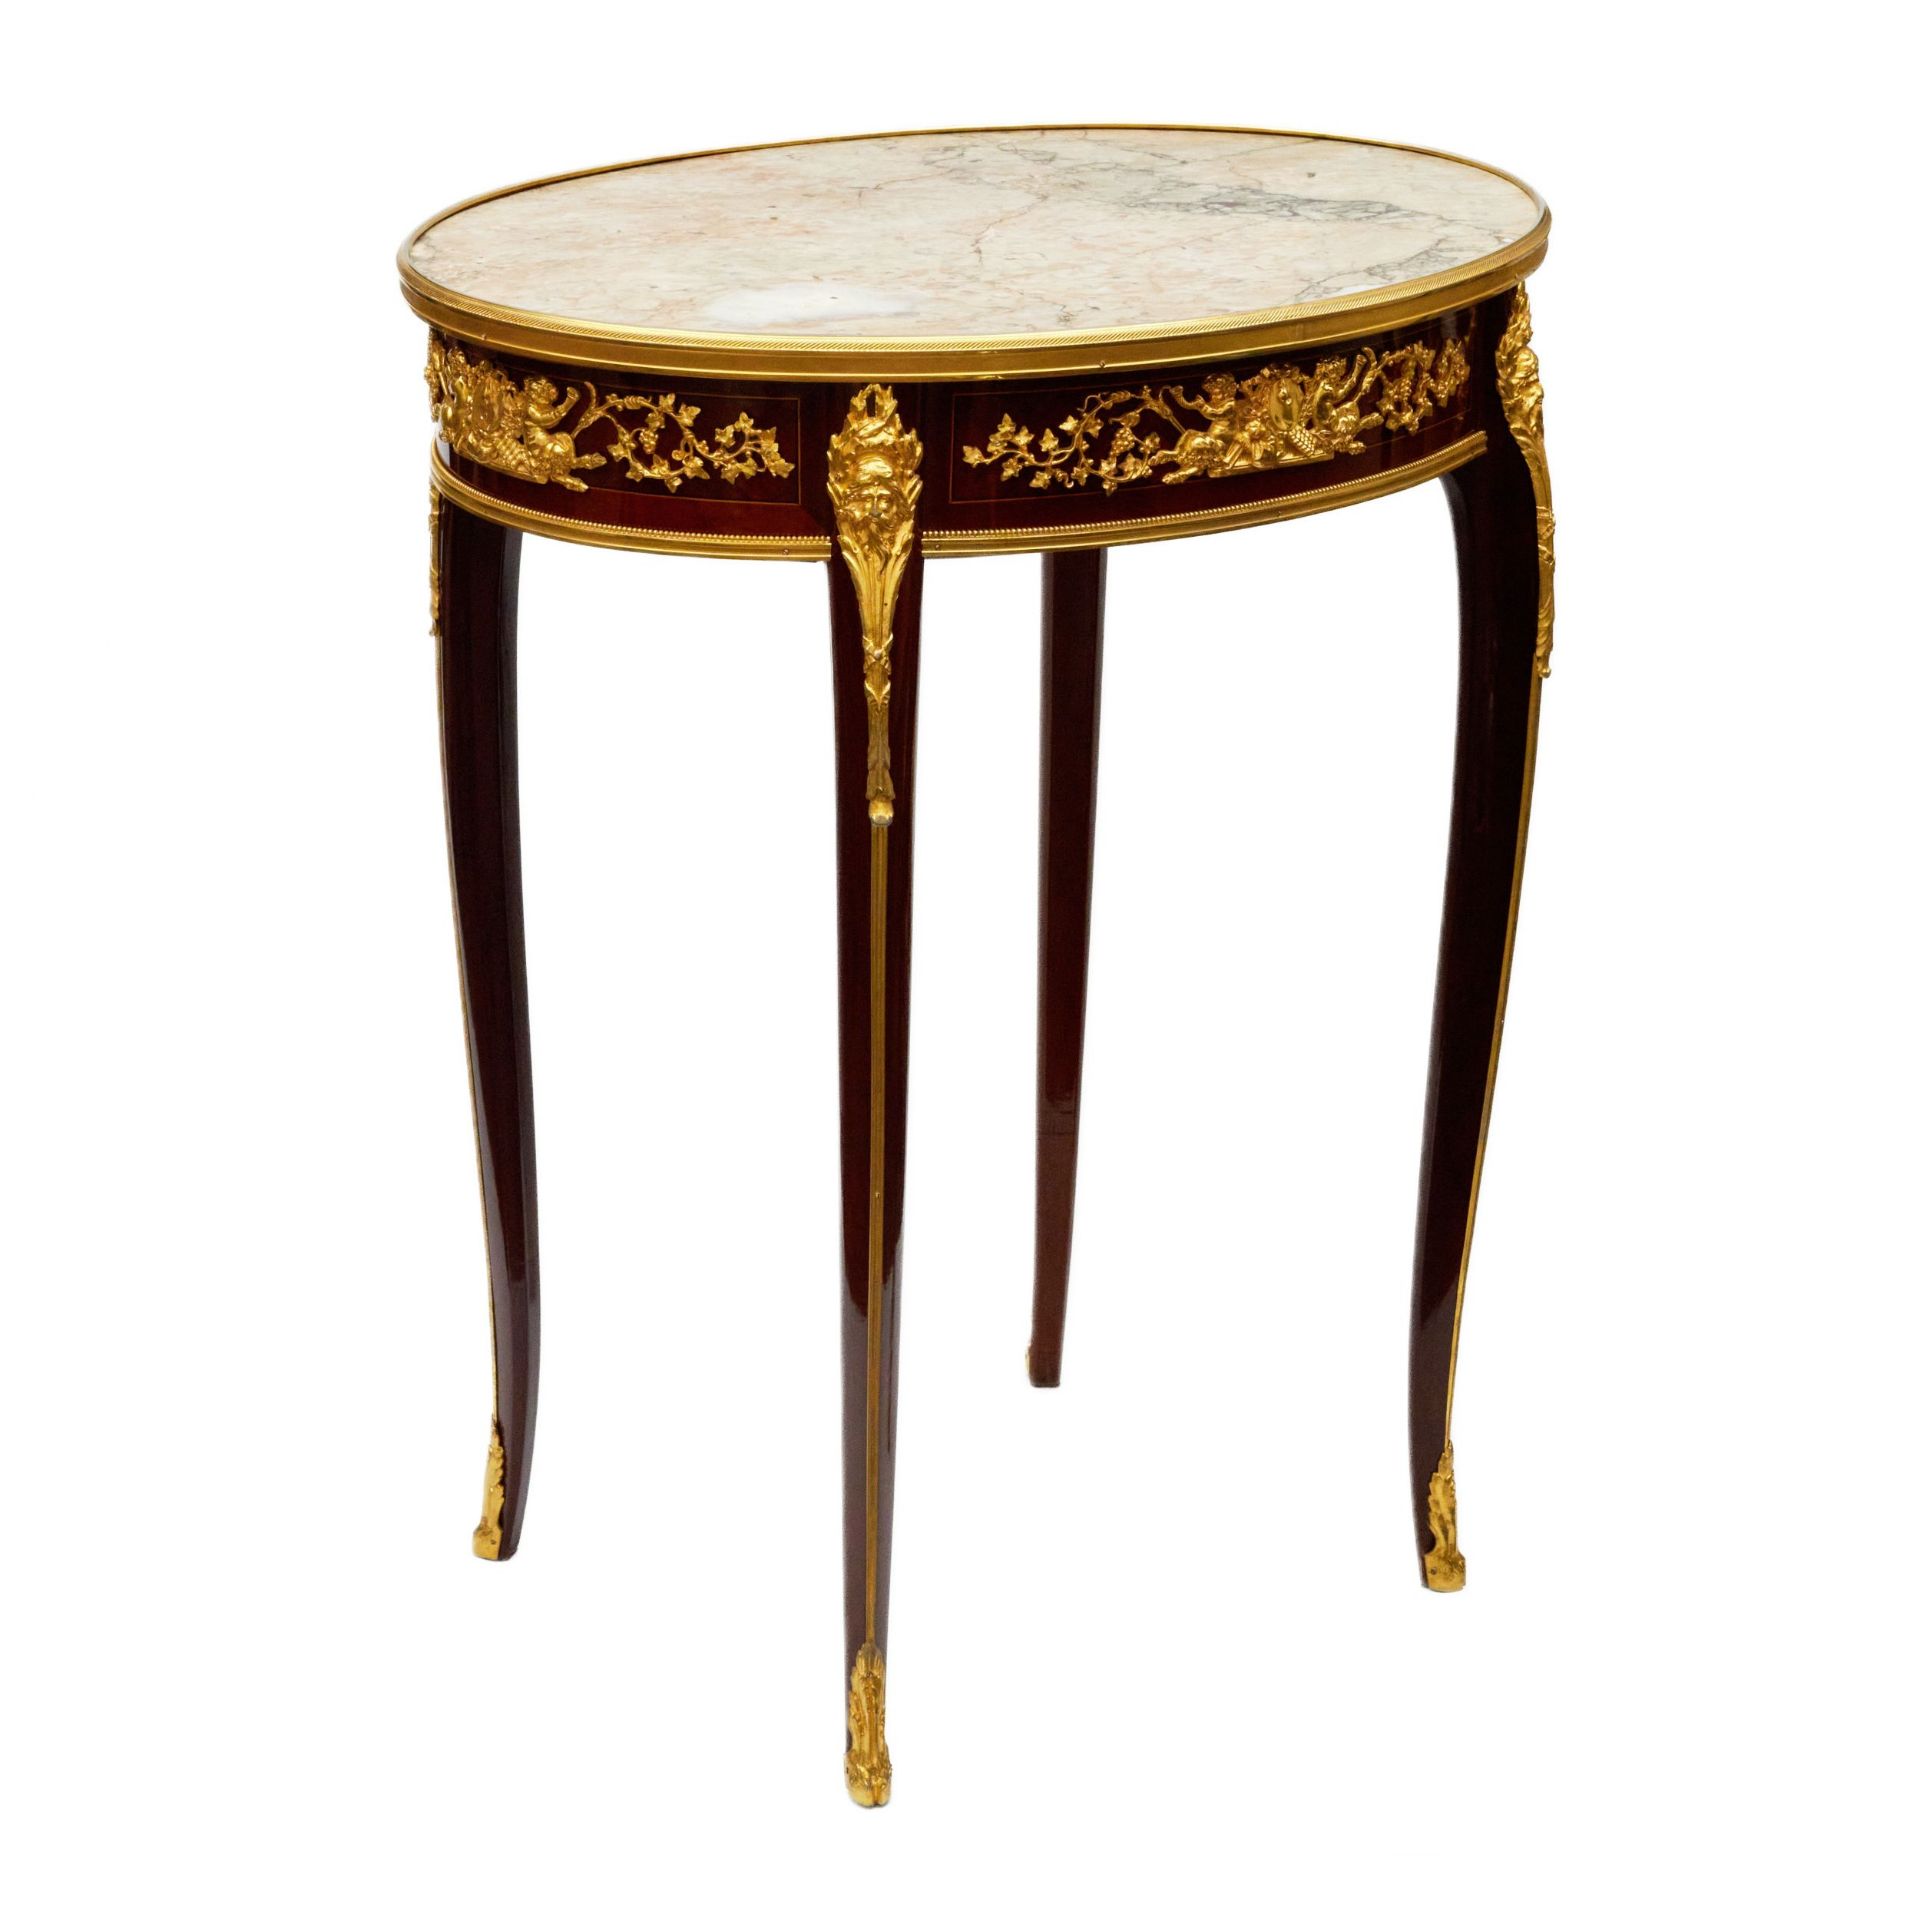 Magnificent mahogany and gilded bronze table by Francois Linke. - Image 2 of 5